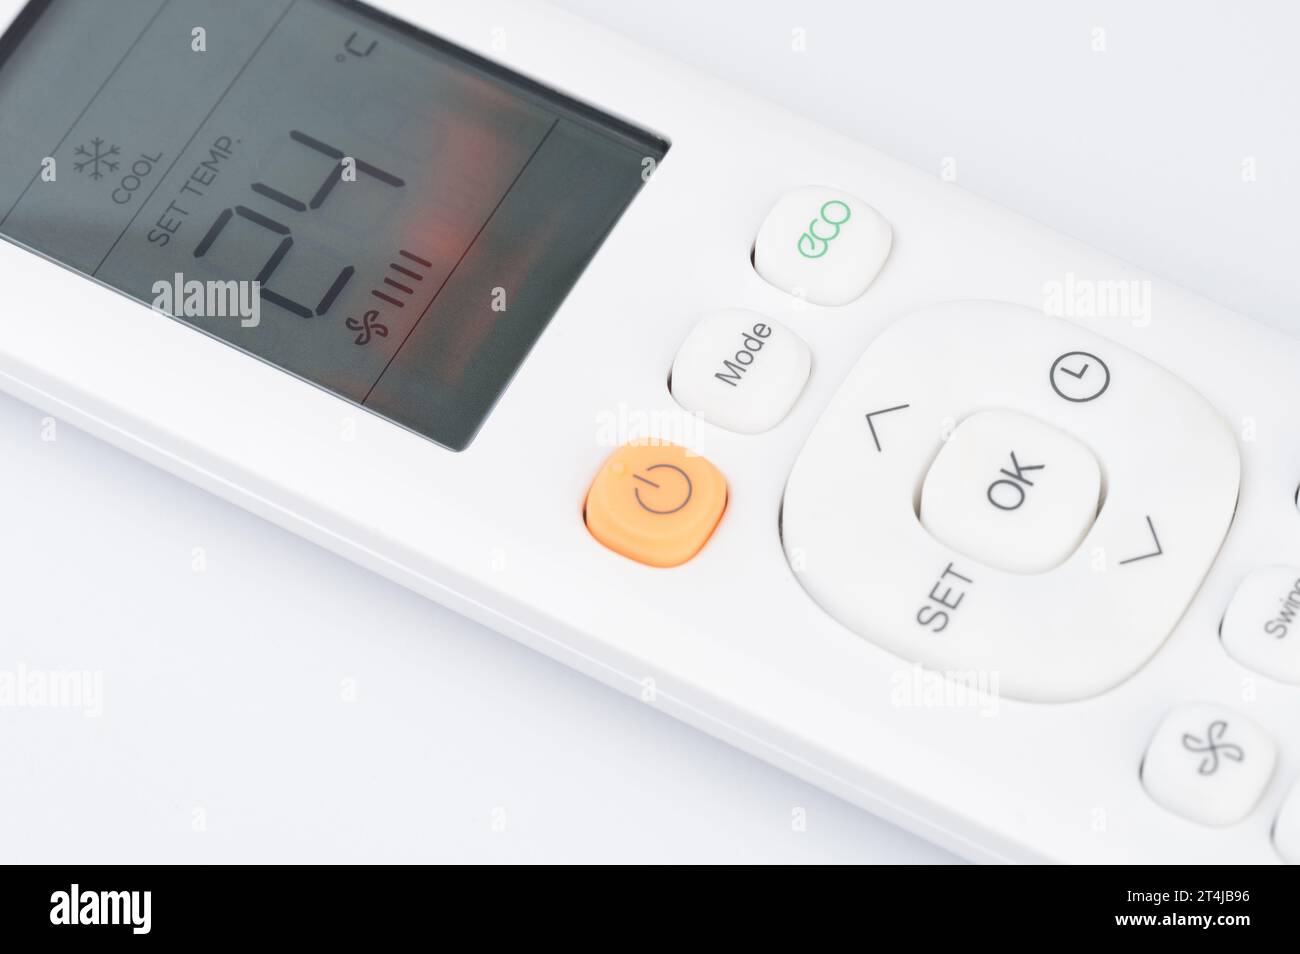 Close up of air conditioner remote control with screen display Stock Photo